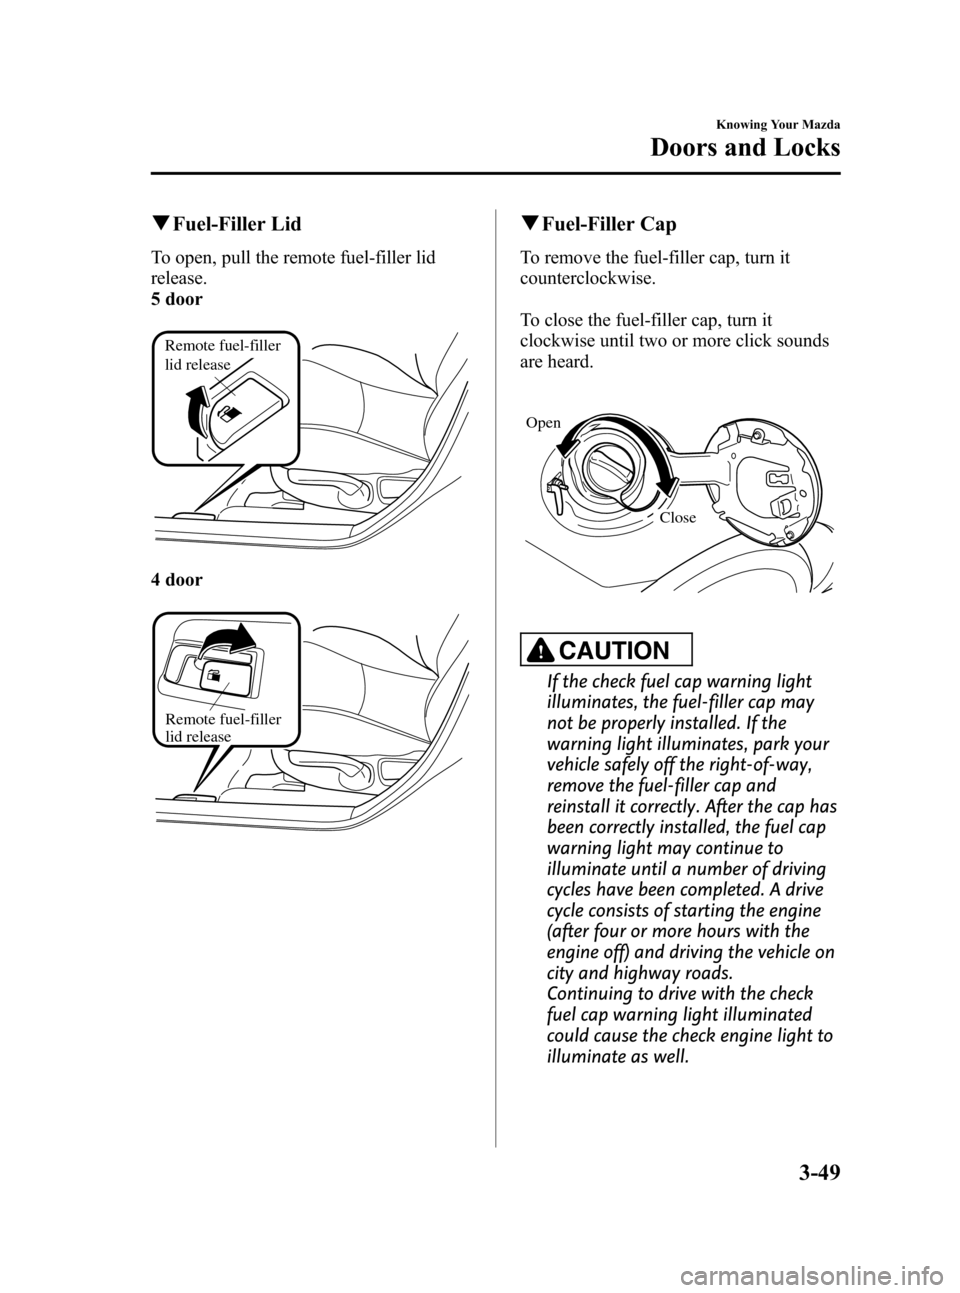 MAZDA MODEL 3 HATCHBACK 2010  Owners Manual (in English) Black plate (125,1)
qFuel-Filler Lid
To open, pull the remote fuel-filler lid
release.
5 door
Remote fuel-filler 
lid release
4 door
Remote fuel-filler 
lid release
qFuel-Filler Cap
To remove the fuel